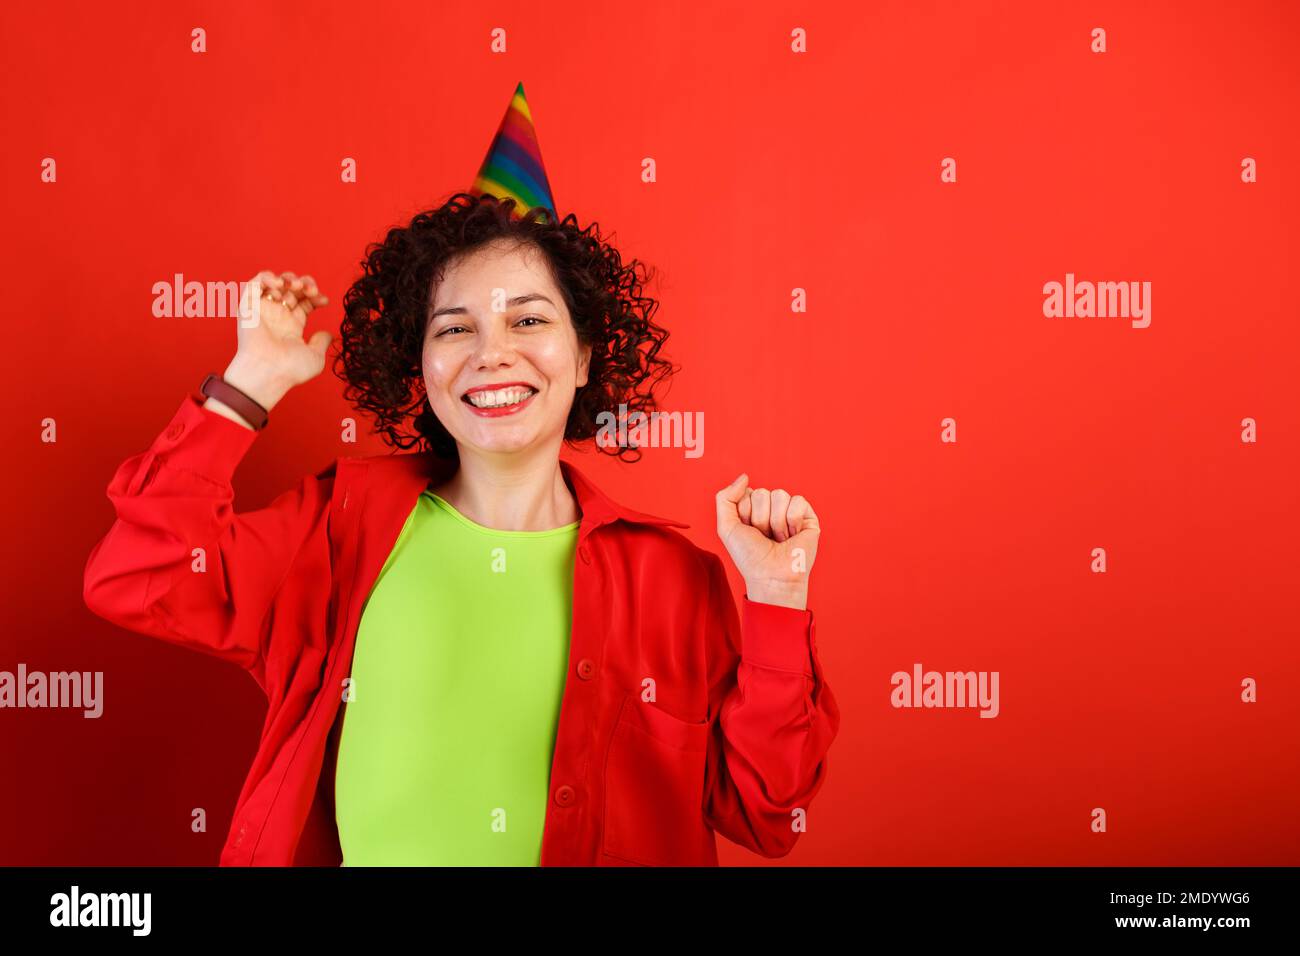 Curly cute girl laughs and jumps in a colorful birthday cap. Studio portrait of white woman on a bright red background. Positive smiling young female. Stock Photo